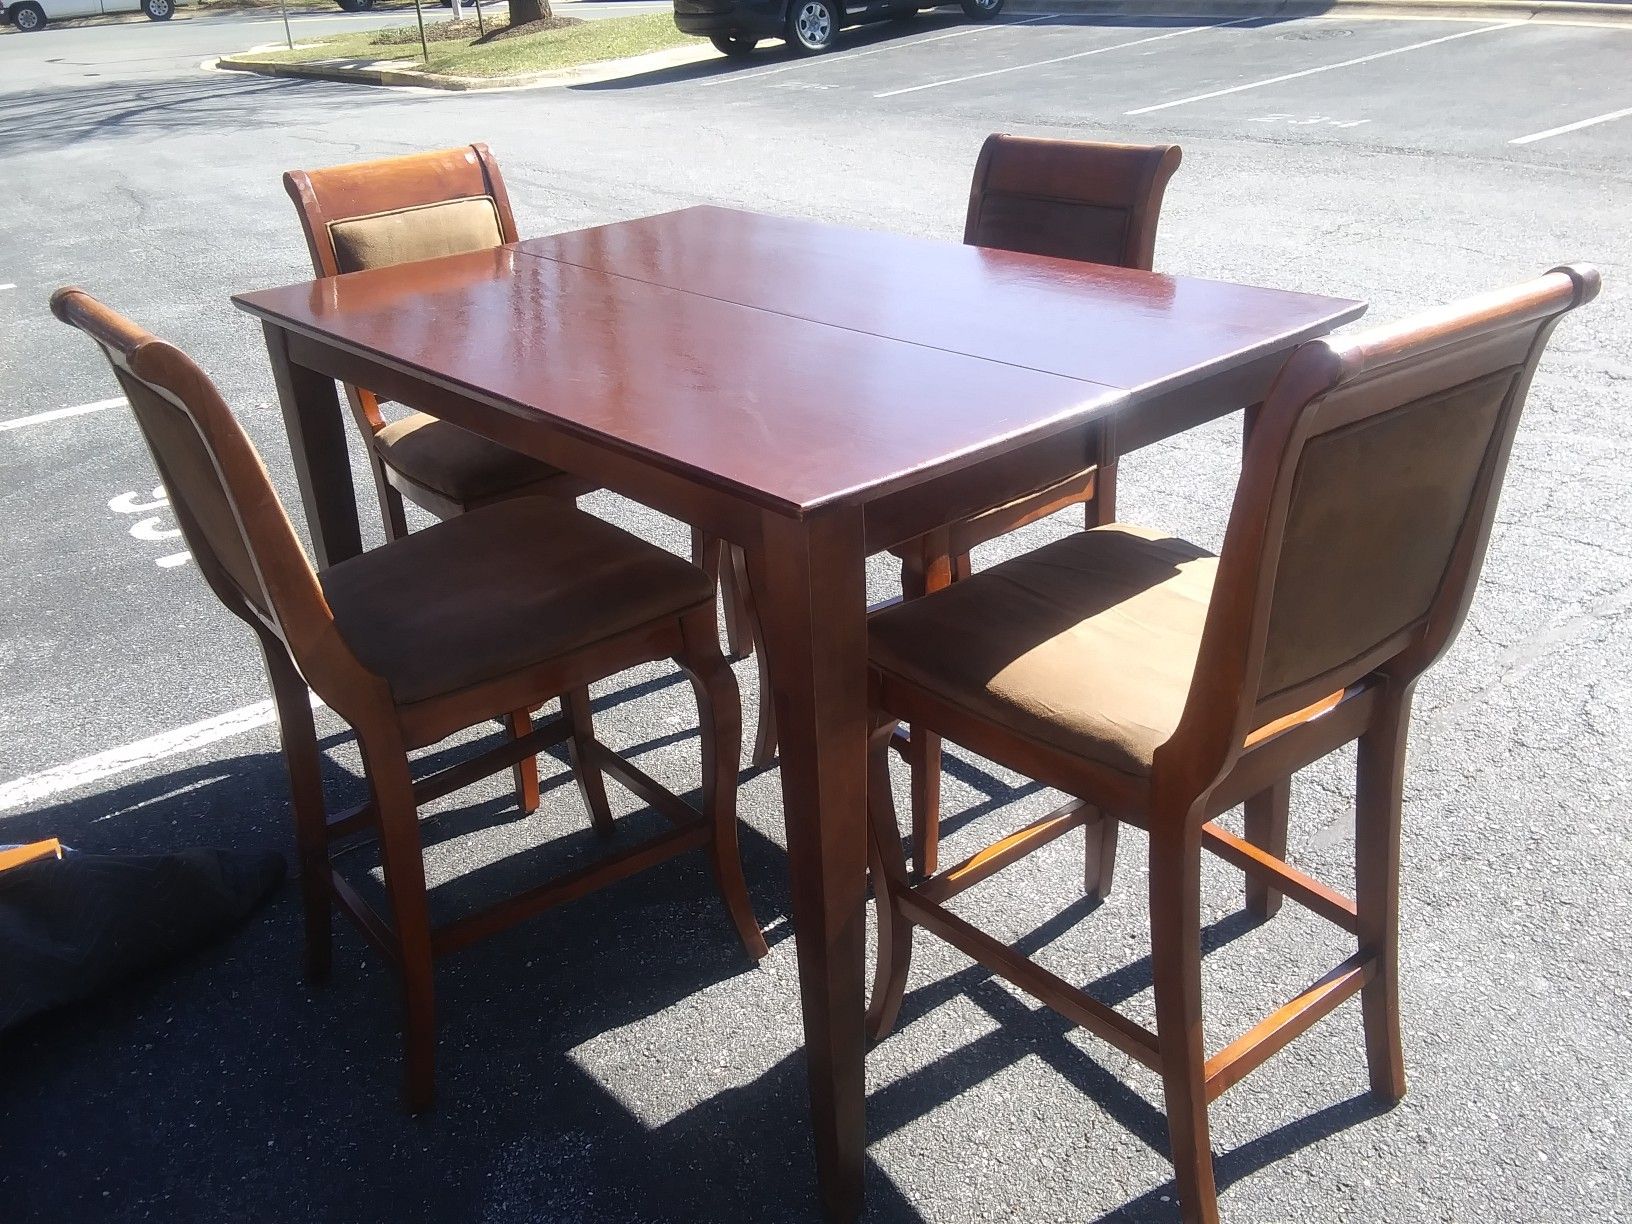 Counter hight expandable table set With chairs 5 chairs padding Chairs